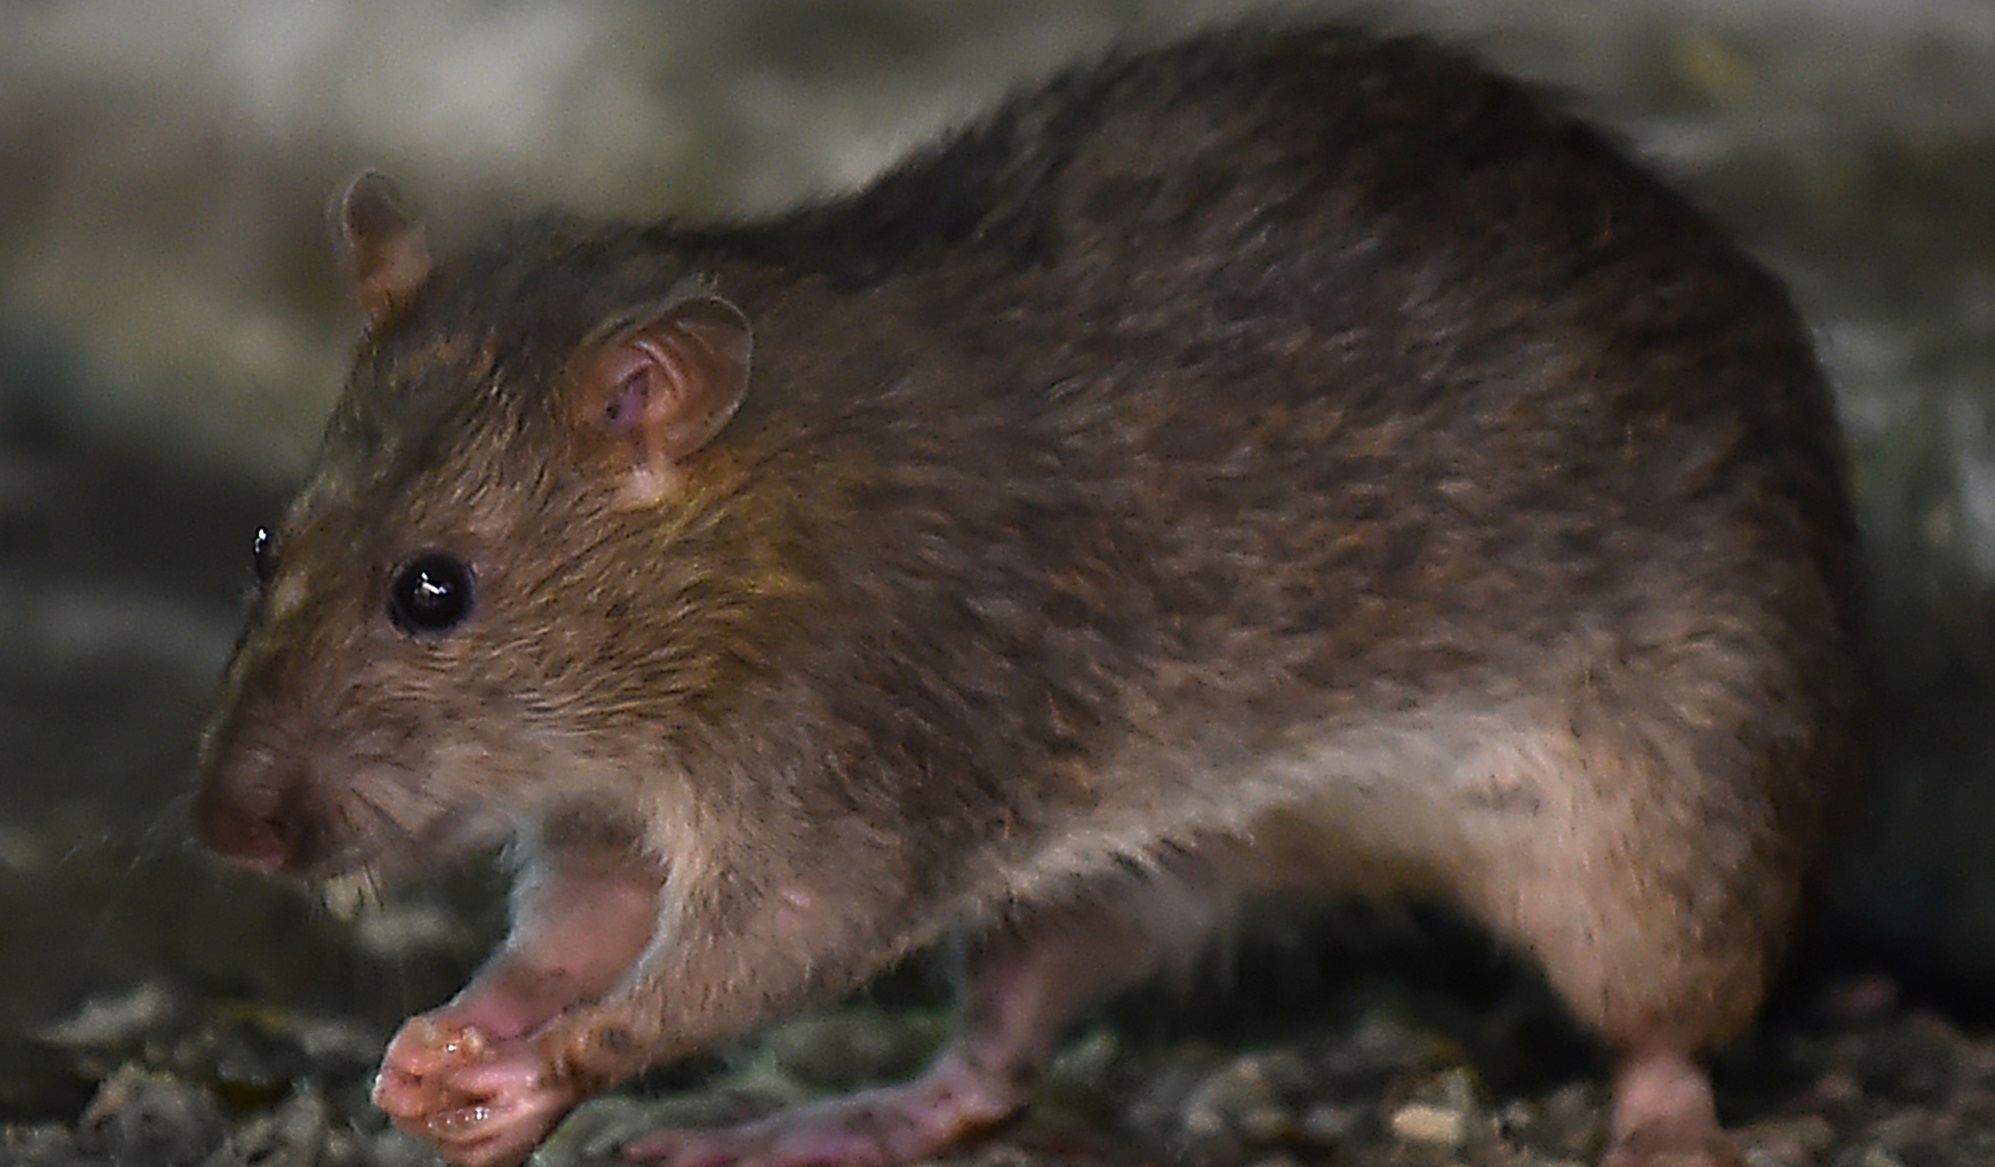 They reveal that sewer rats in New York could be carriers of COVID variants